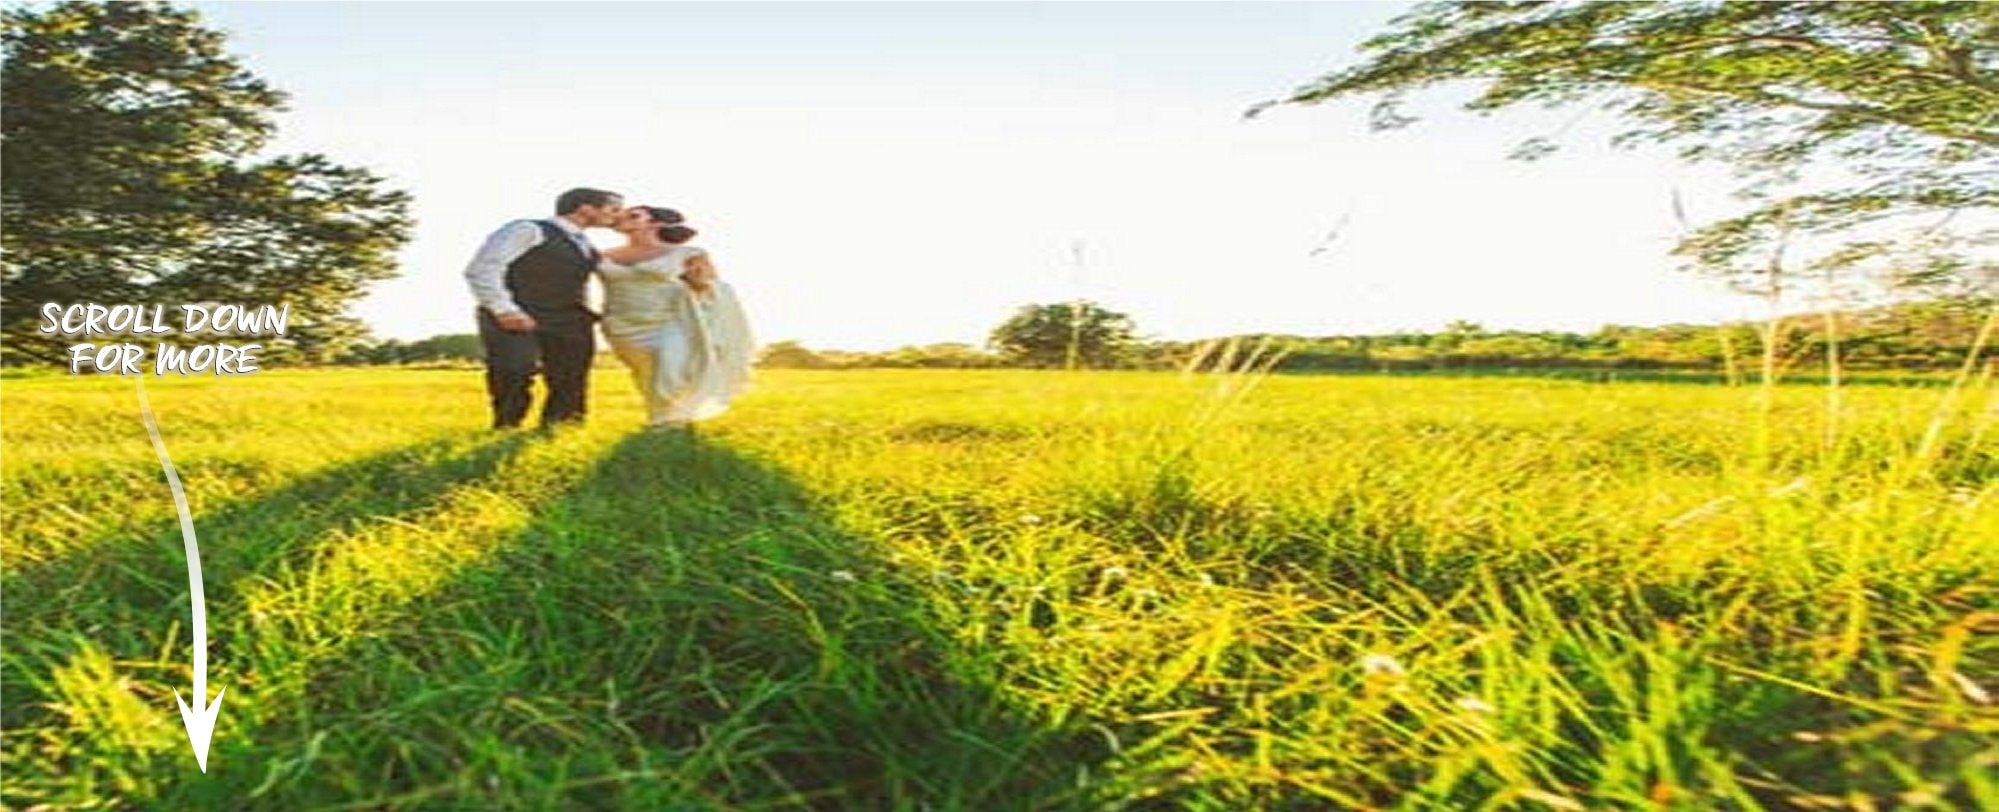 Get married at a 62 acre private estate home near Orlando, FL!